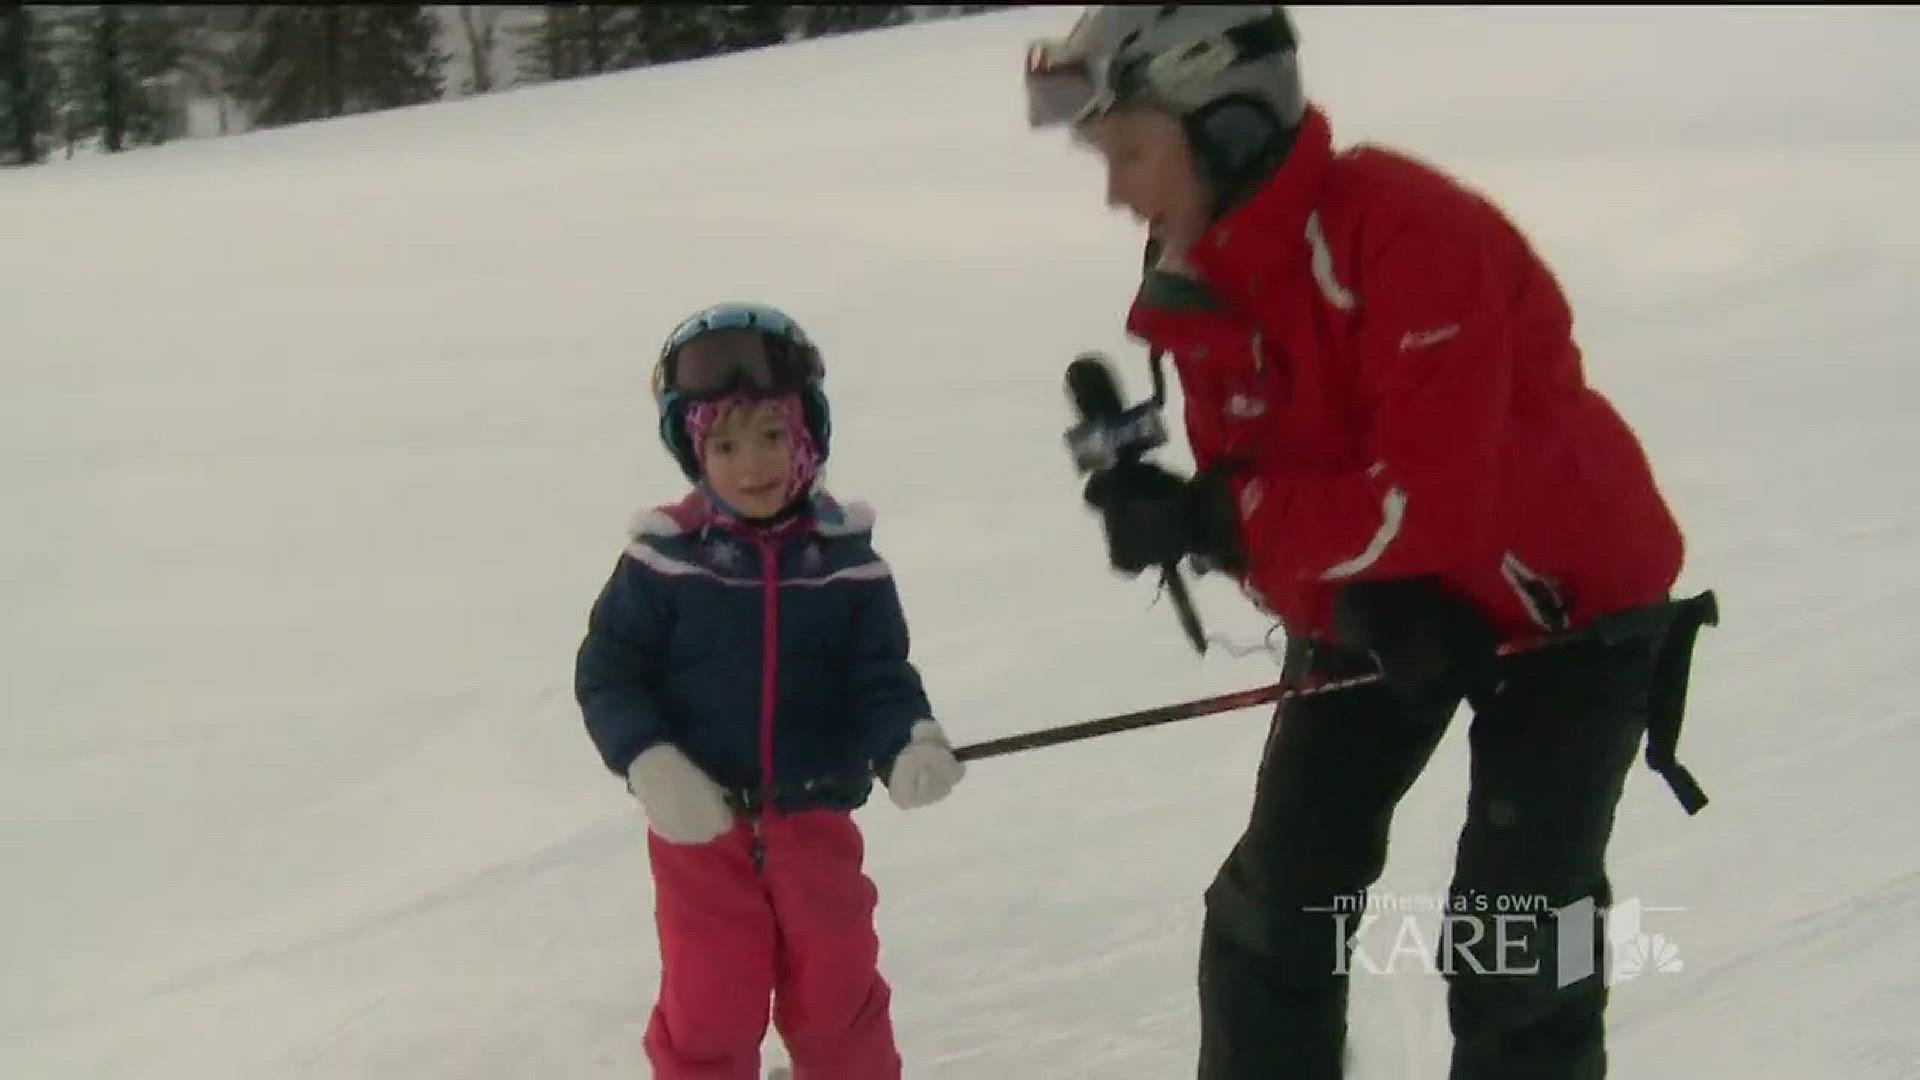 National 'learn to ski and snowboard month'